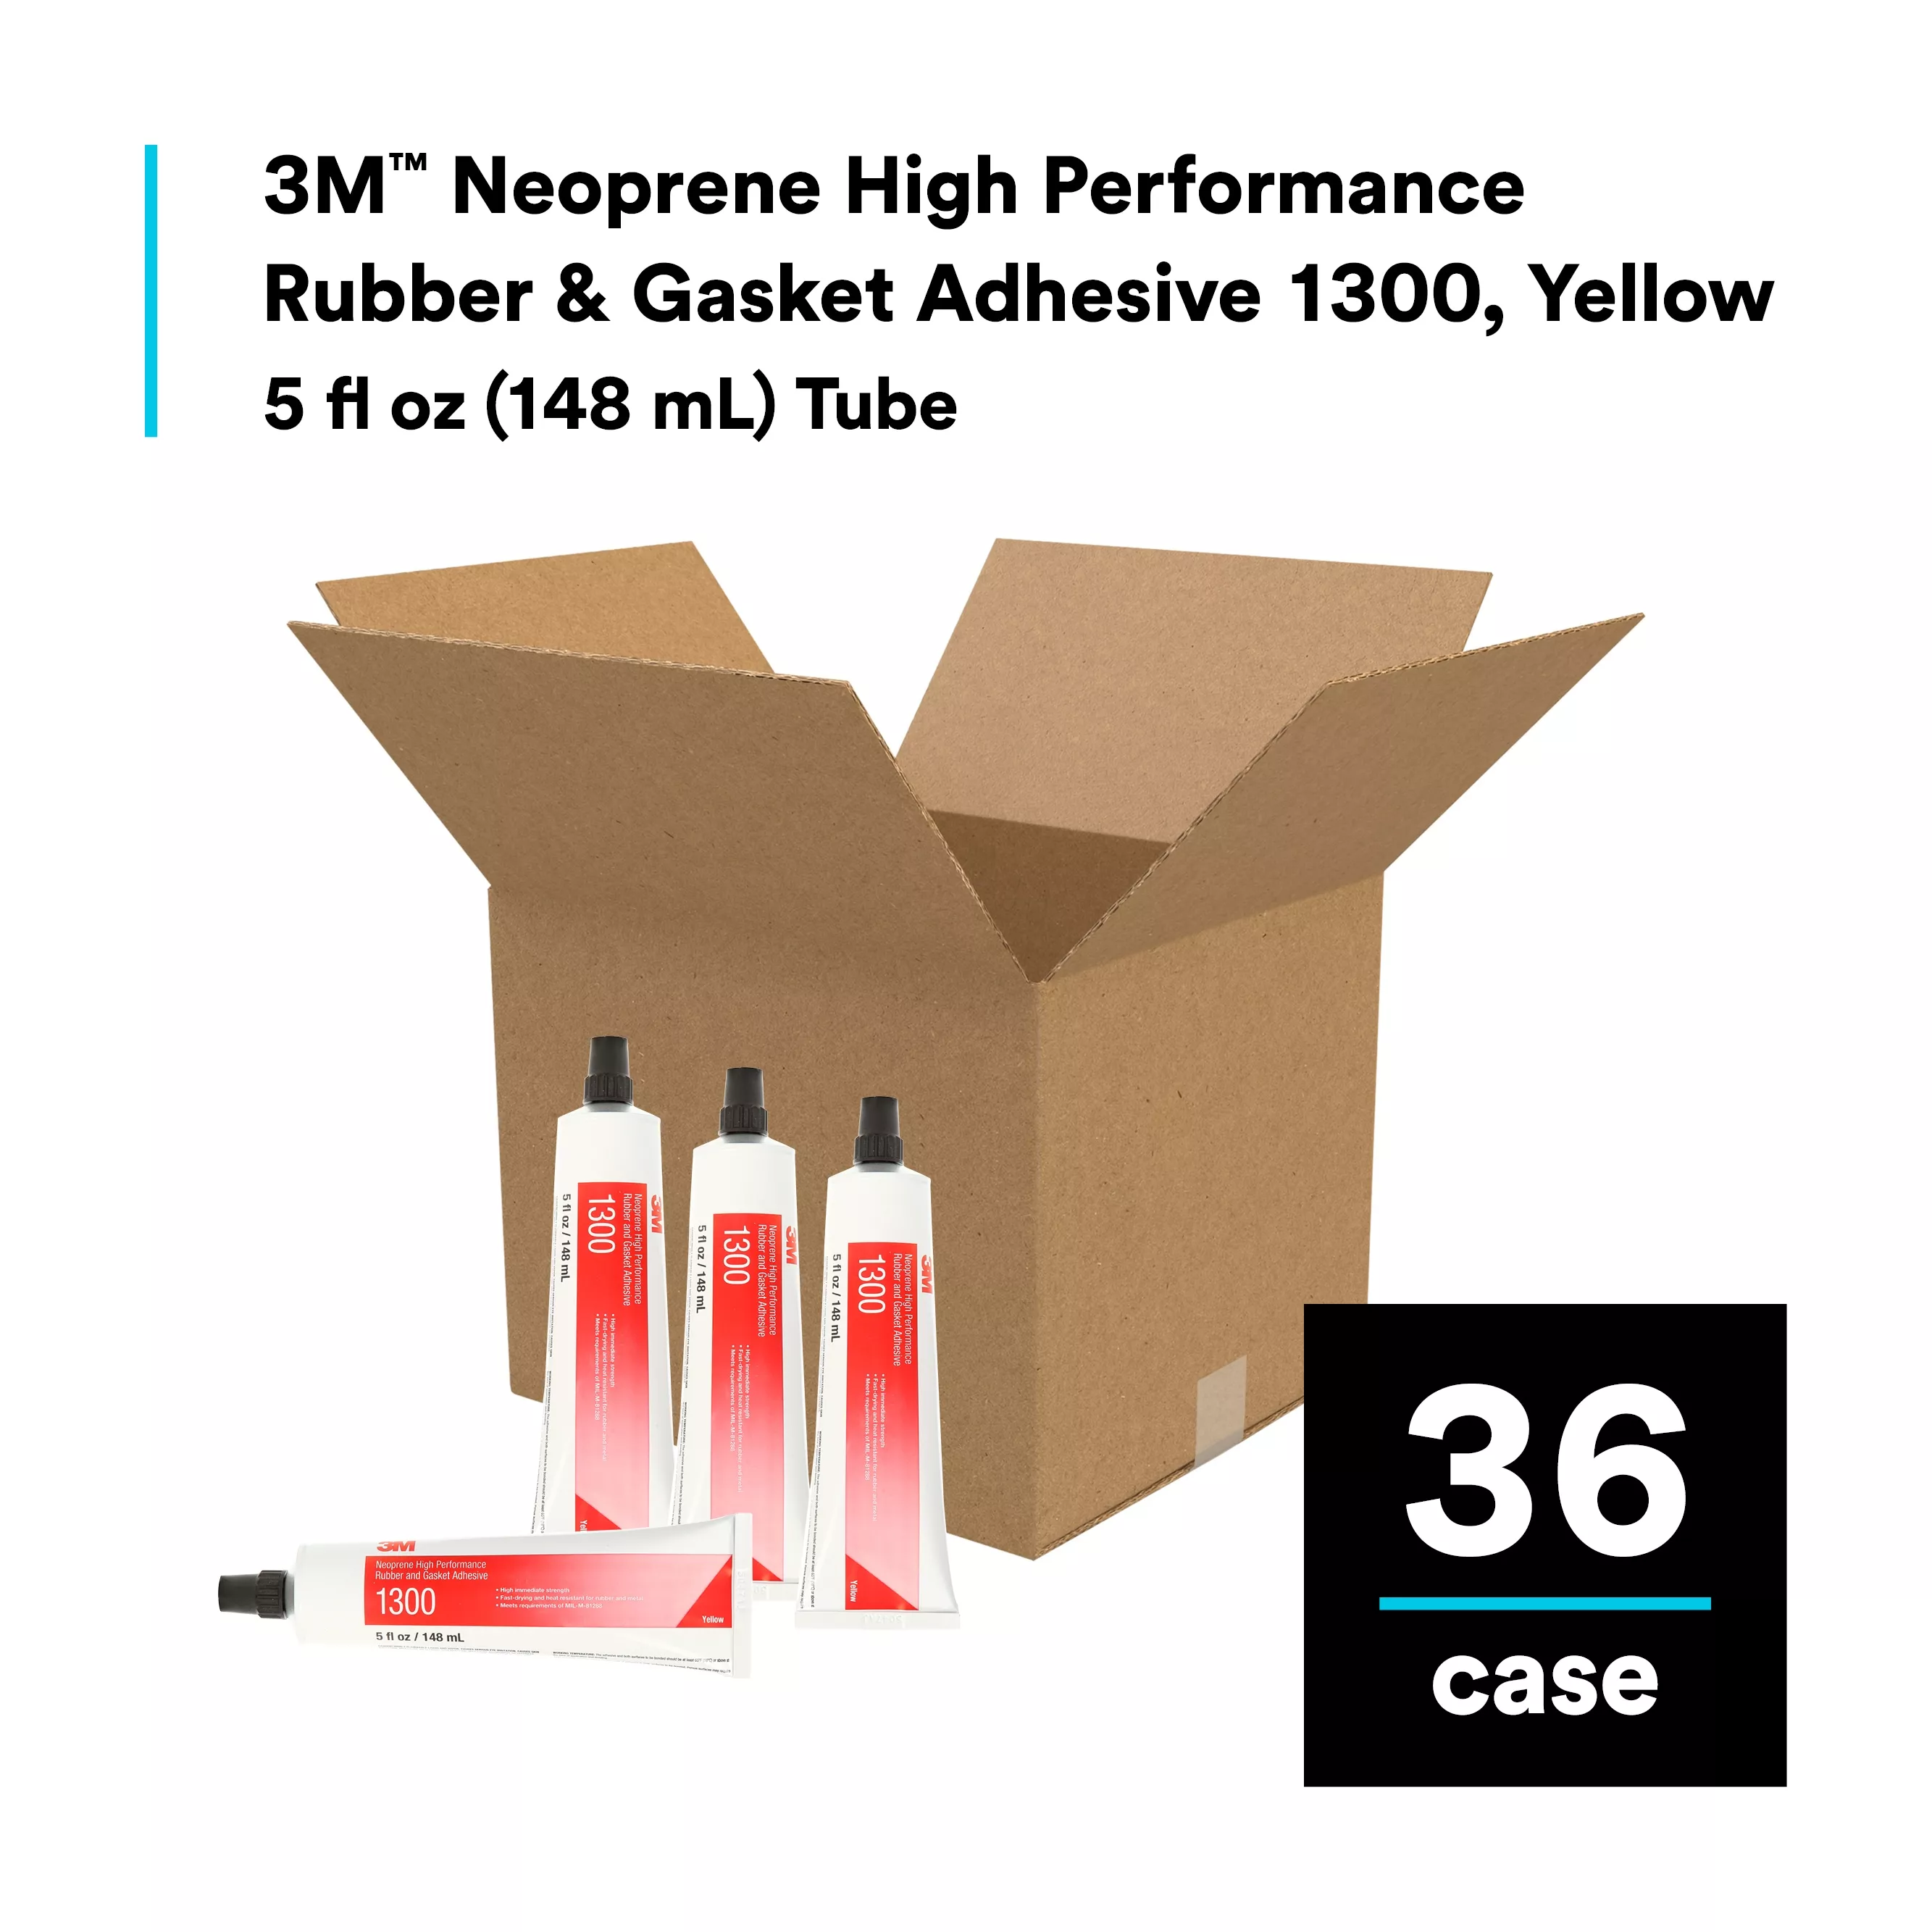 Product Number 1300 | 3M™ Neoprene High Performance Rubber and Gasket Adhesive 1300